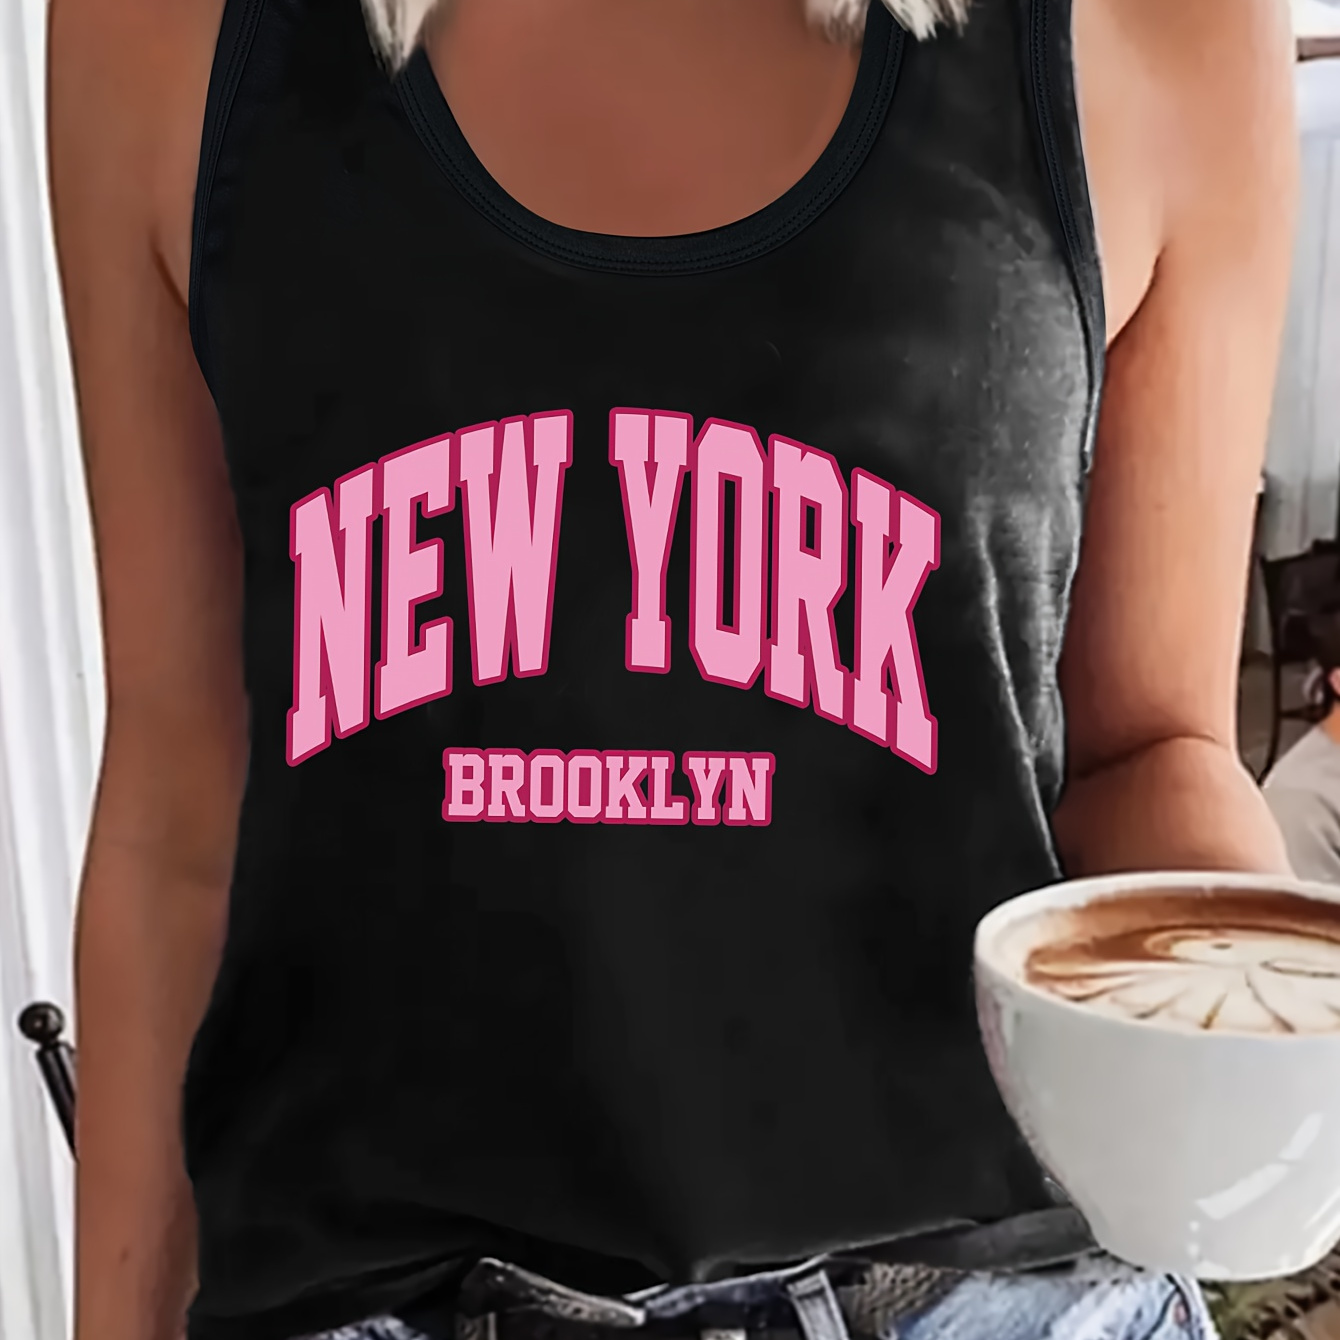 

New York Print Tank Top, Sleeveless Crew Neck Casual Top For Summer & Spring, Women's Clothing